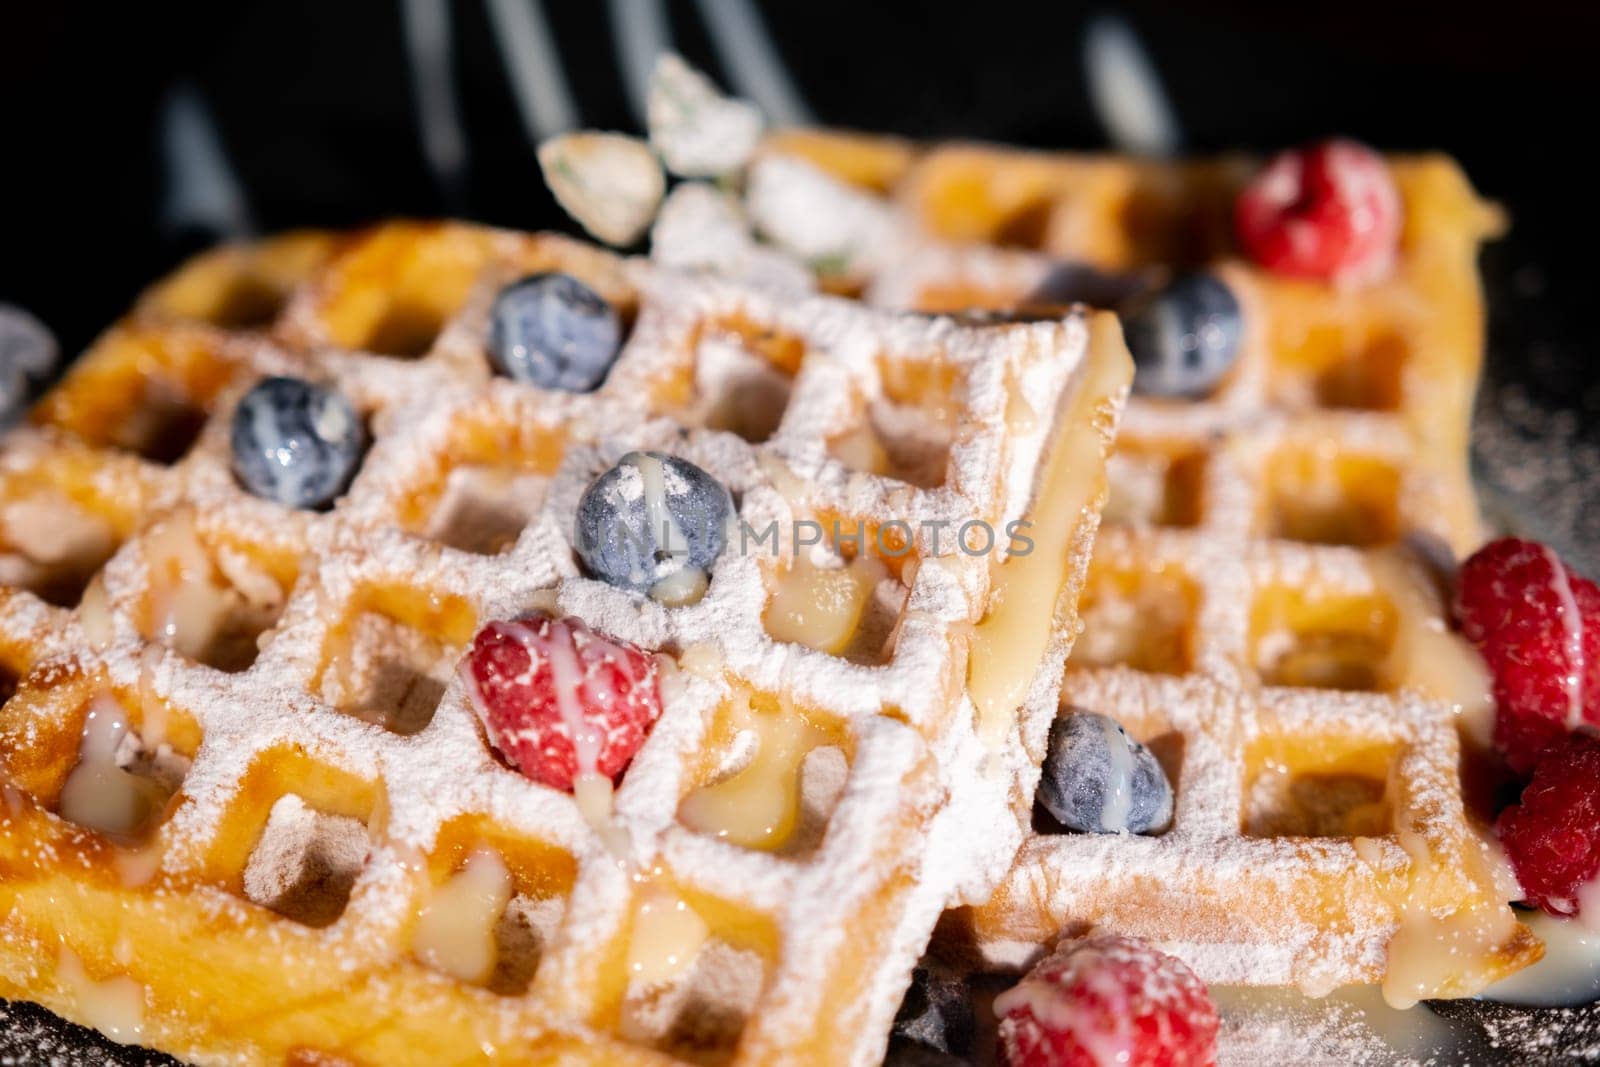 Belgian French waffles close-up with berries, blueberries athens raspberries blueberries sprinkled with powdered sugar, condensed milk, side view isolated on black background. Sweet breakfast dessert